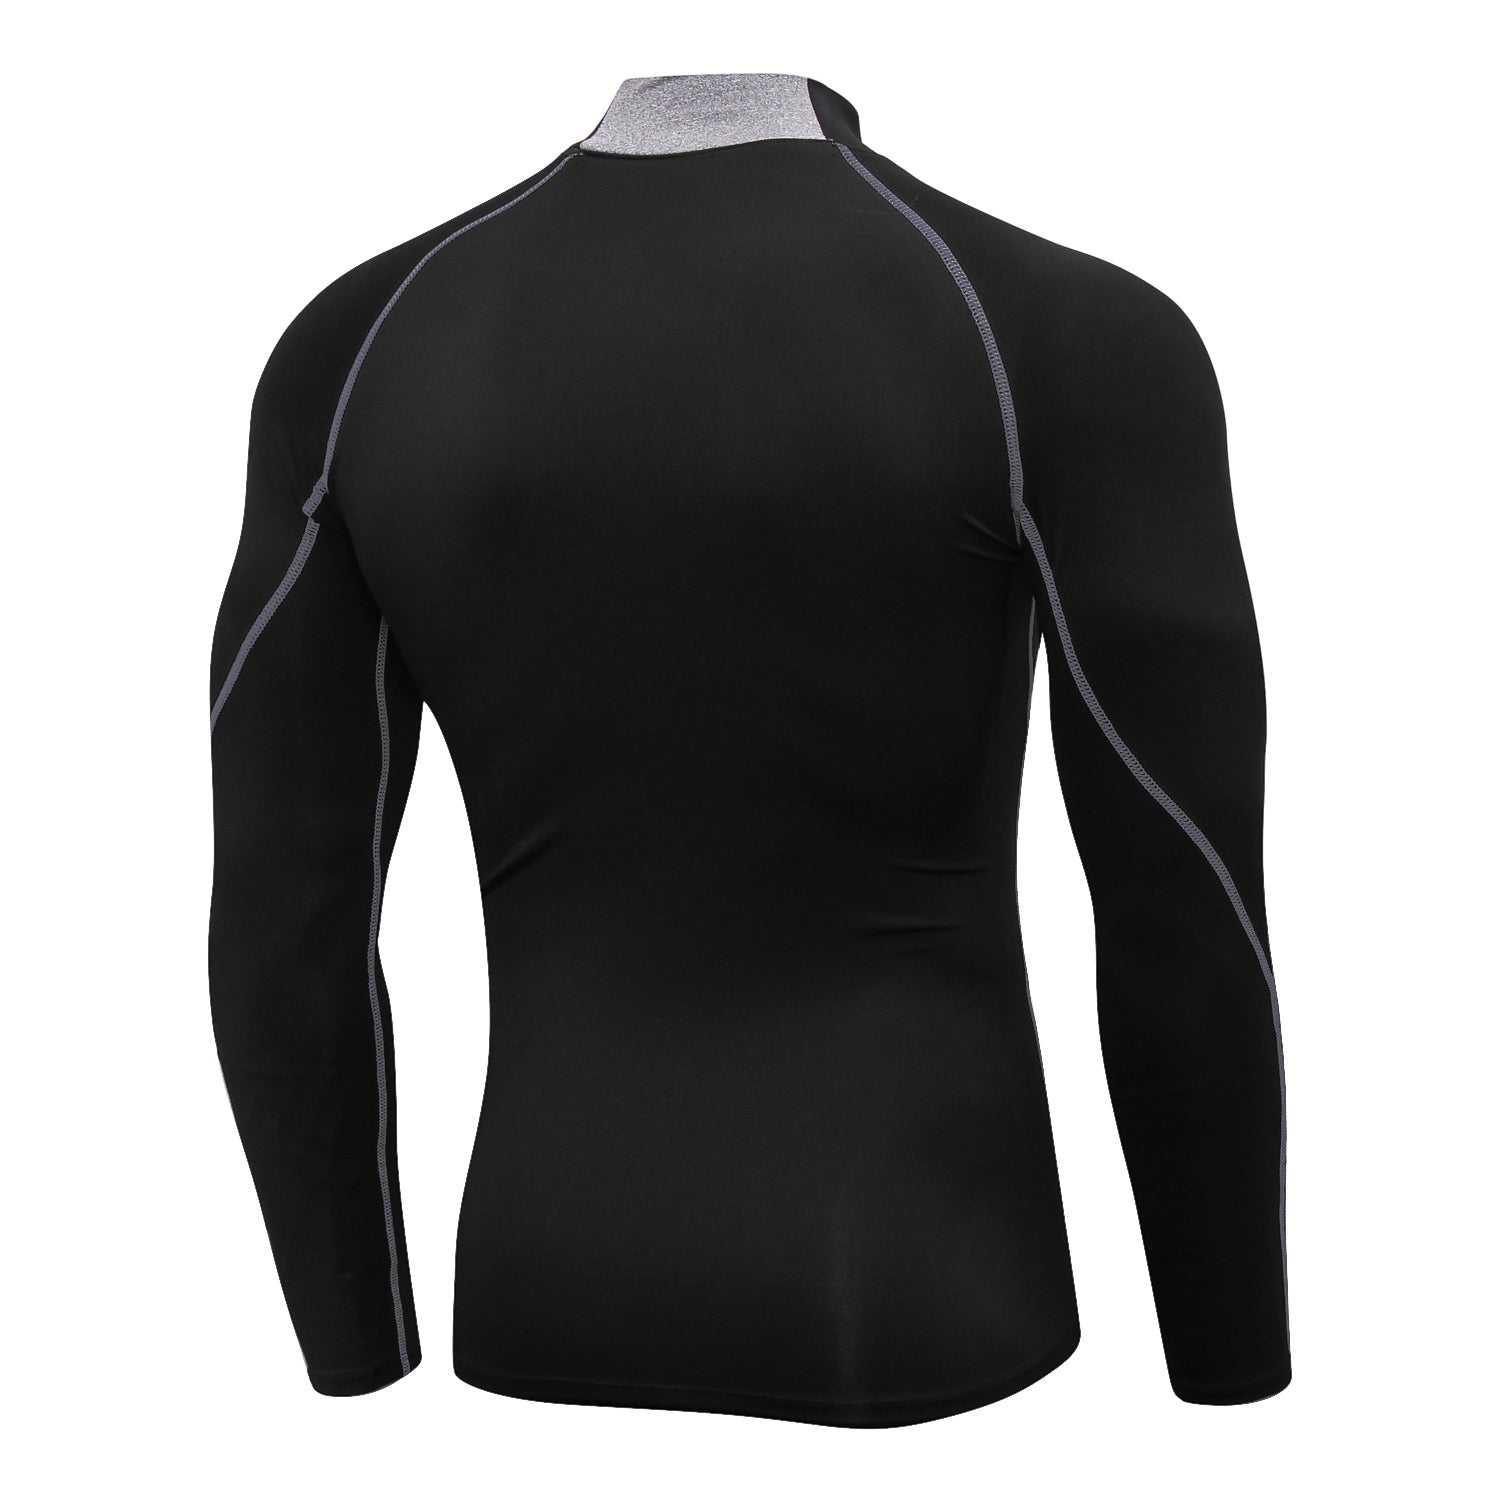 Winter Thermal Sport Shirts Long Sleeve Gym t Shirts Fitness